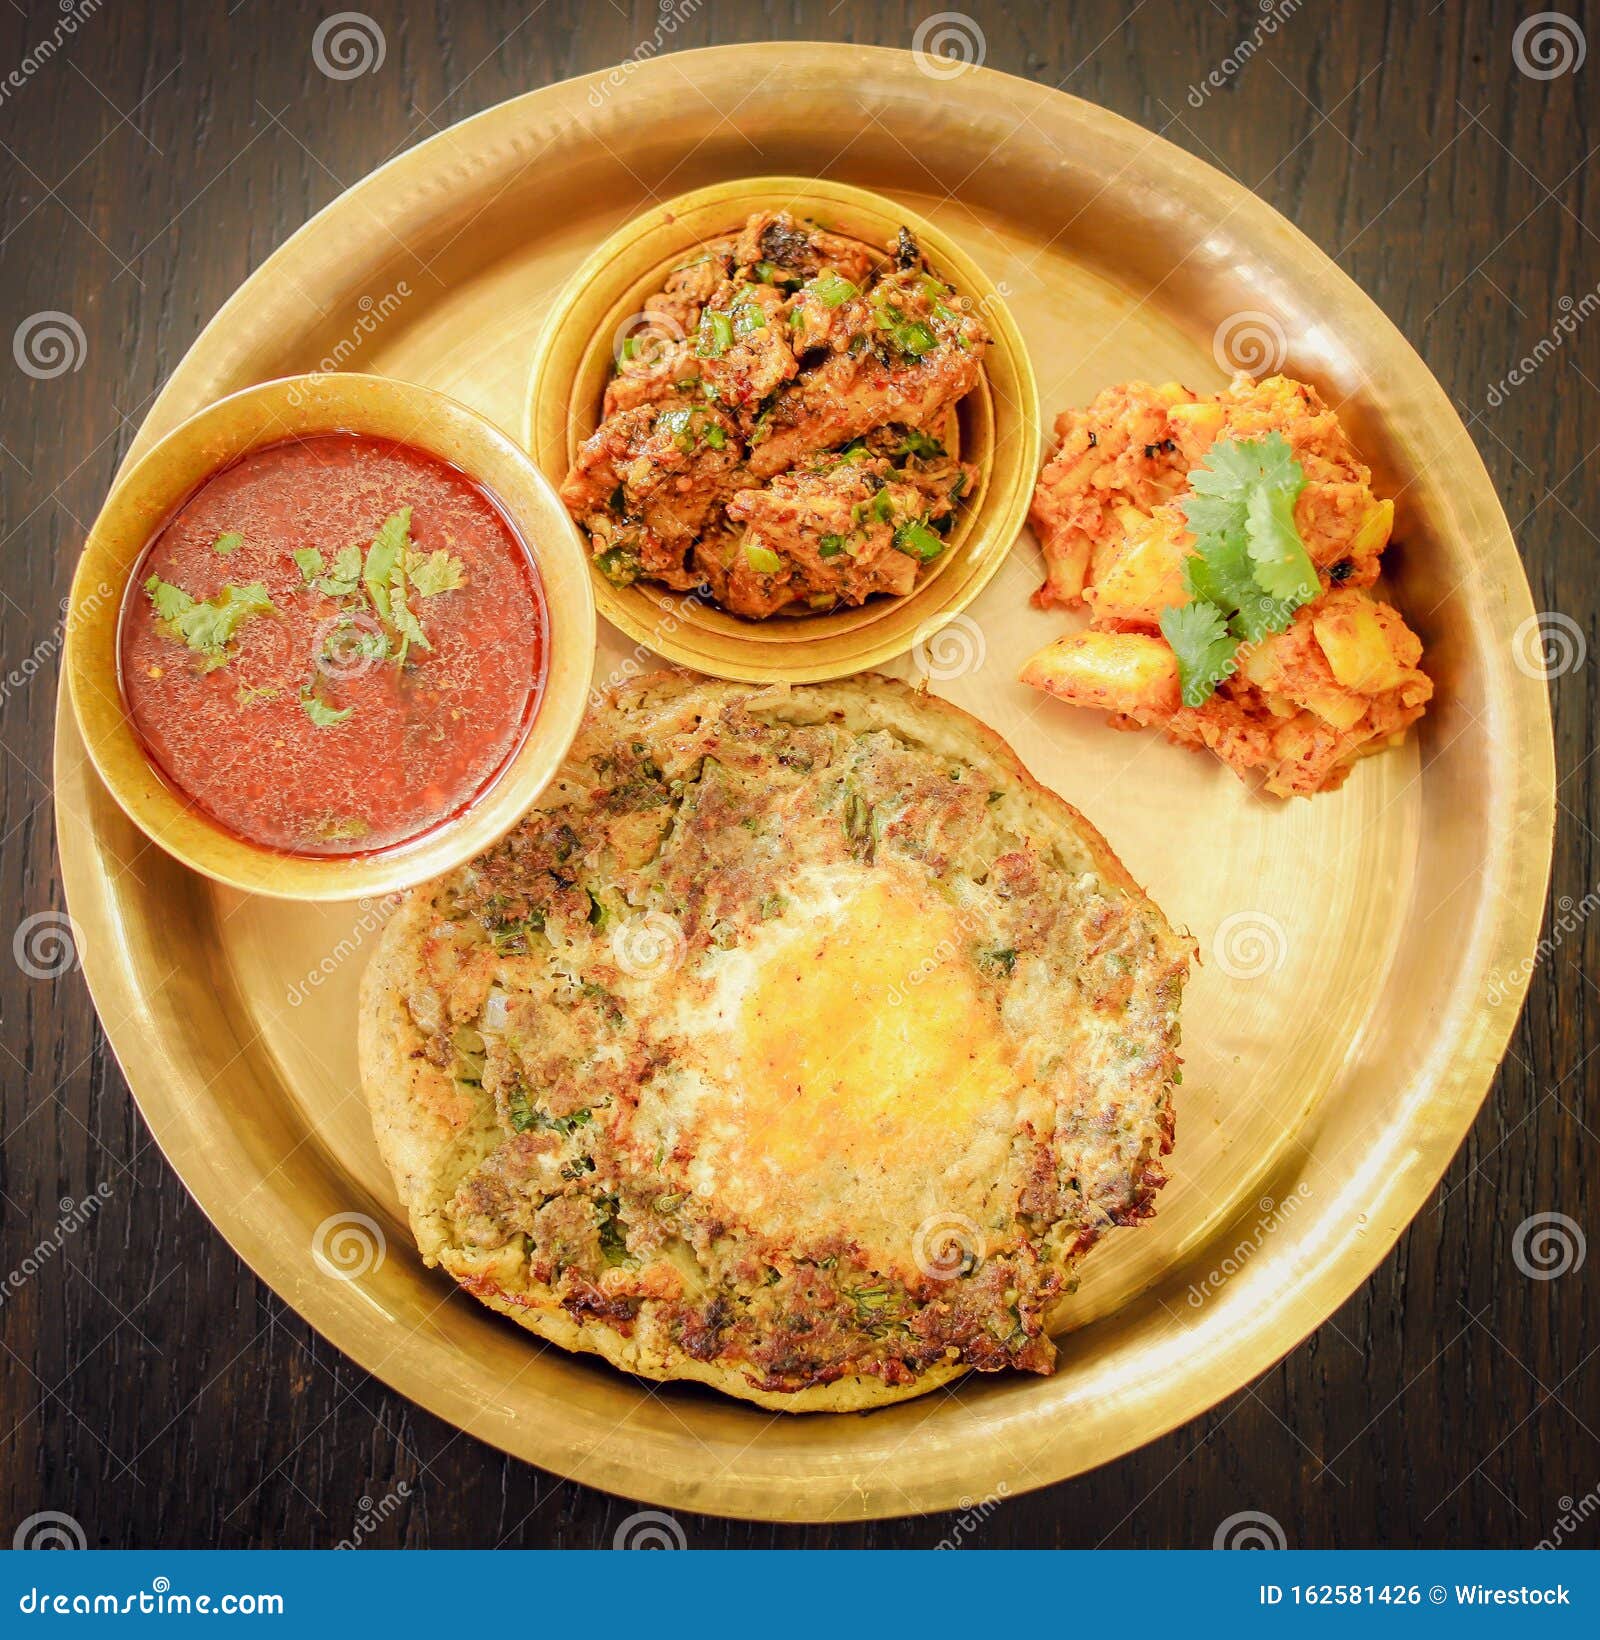 newar food in a tray  on a wooden surface - great for an article about traditional foods